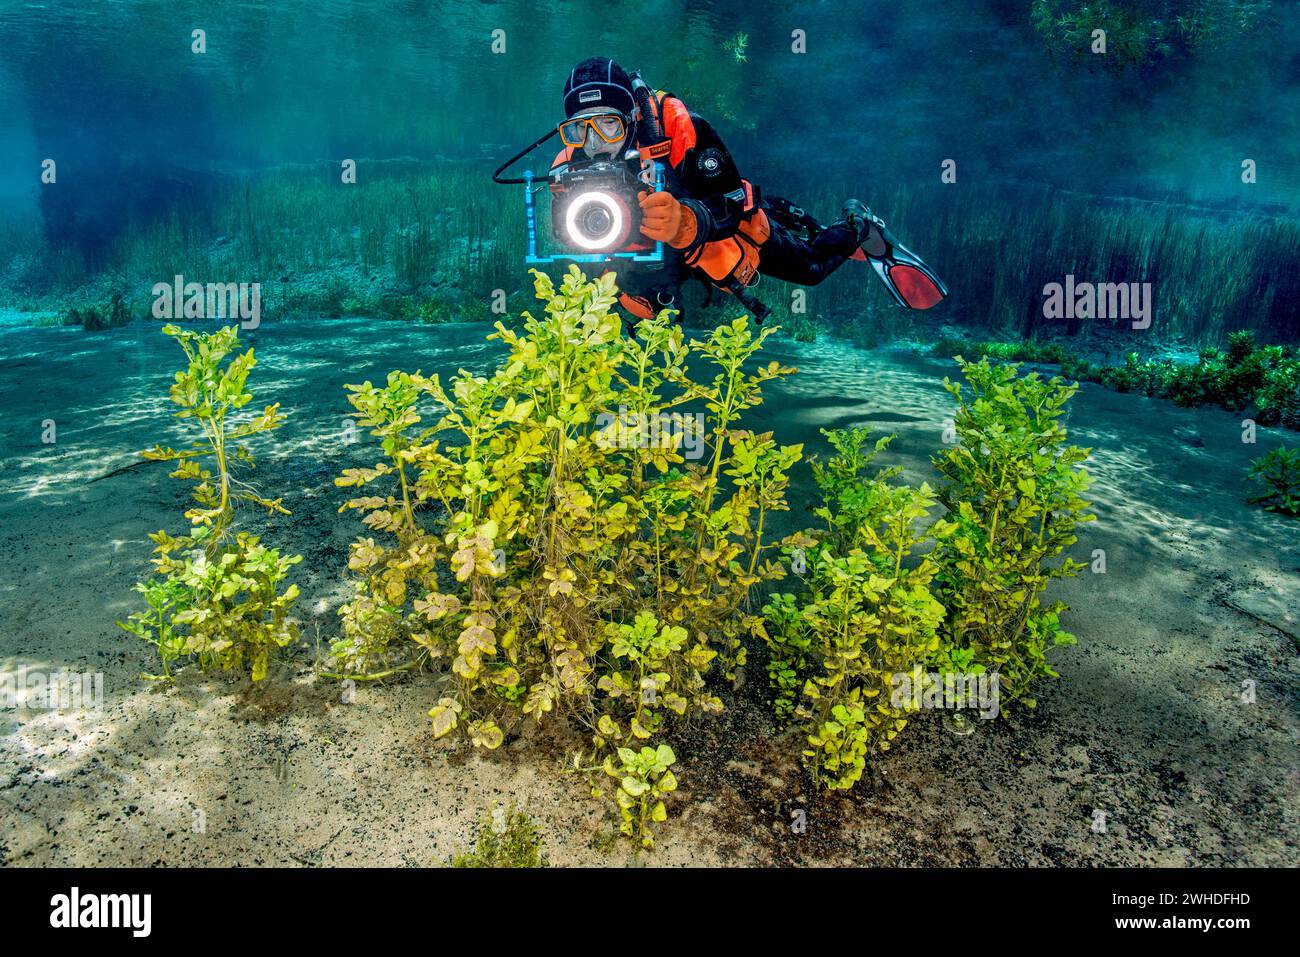 Diver swims with photo equipment through a spring lake in Italy. Stock Photo